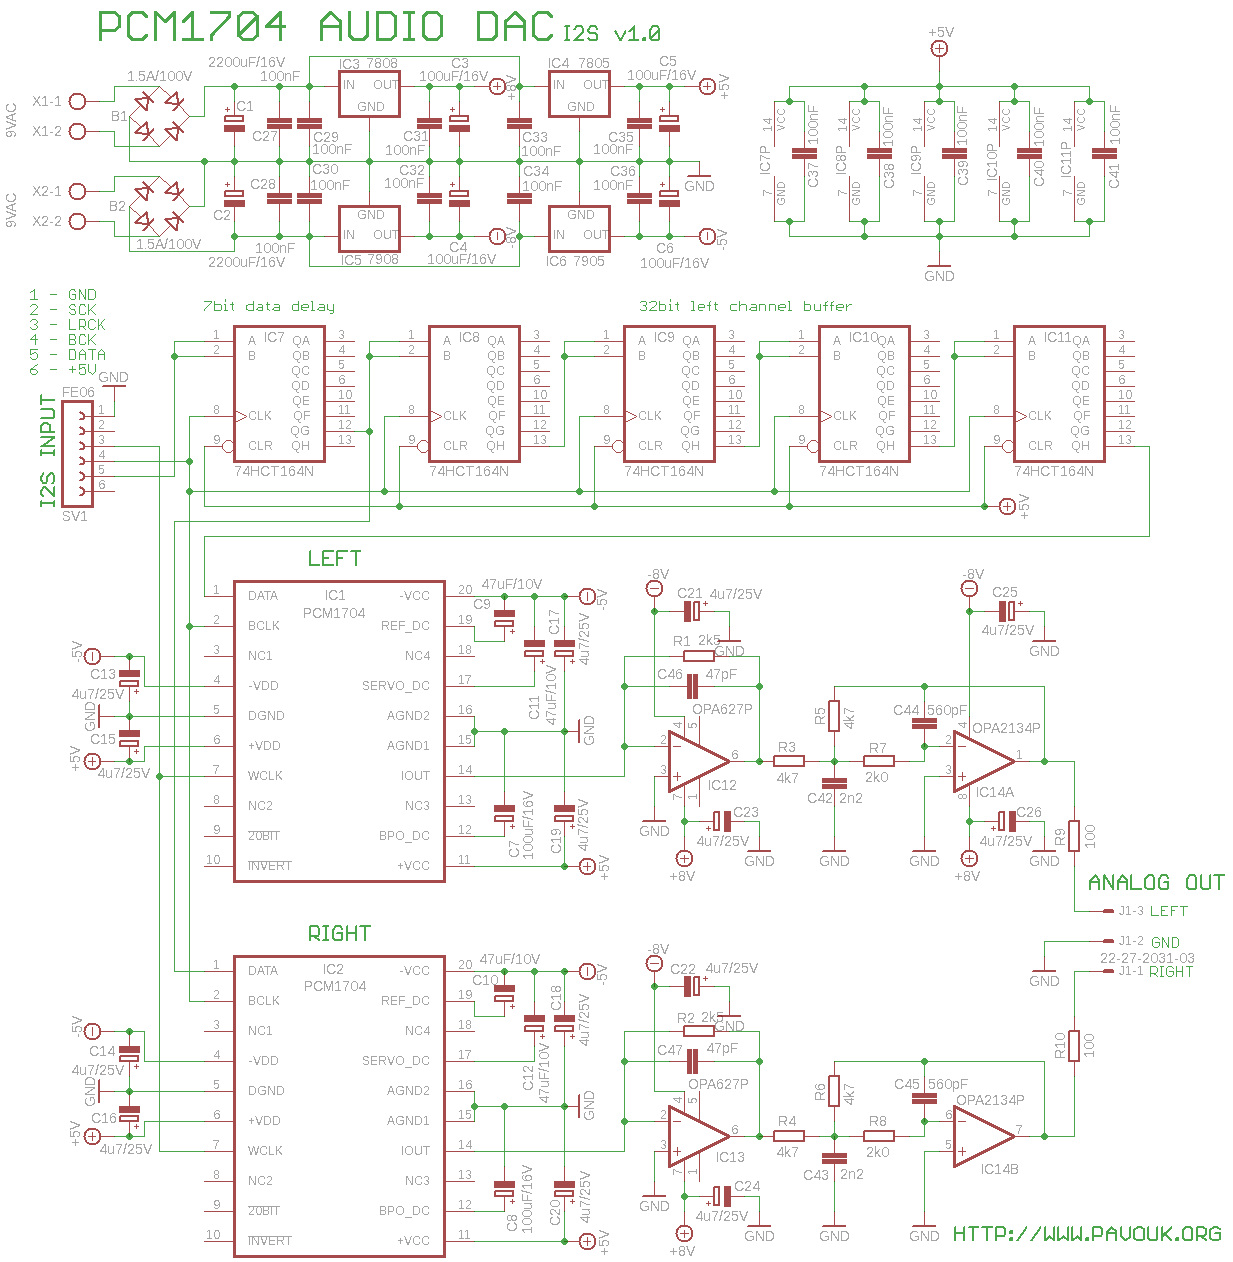 Schematics of DAC with two PCM1704